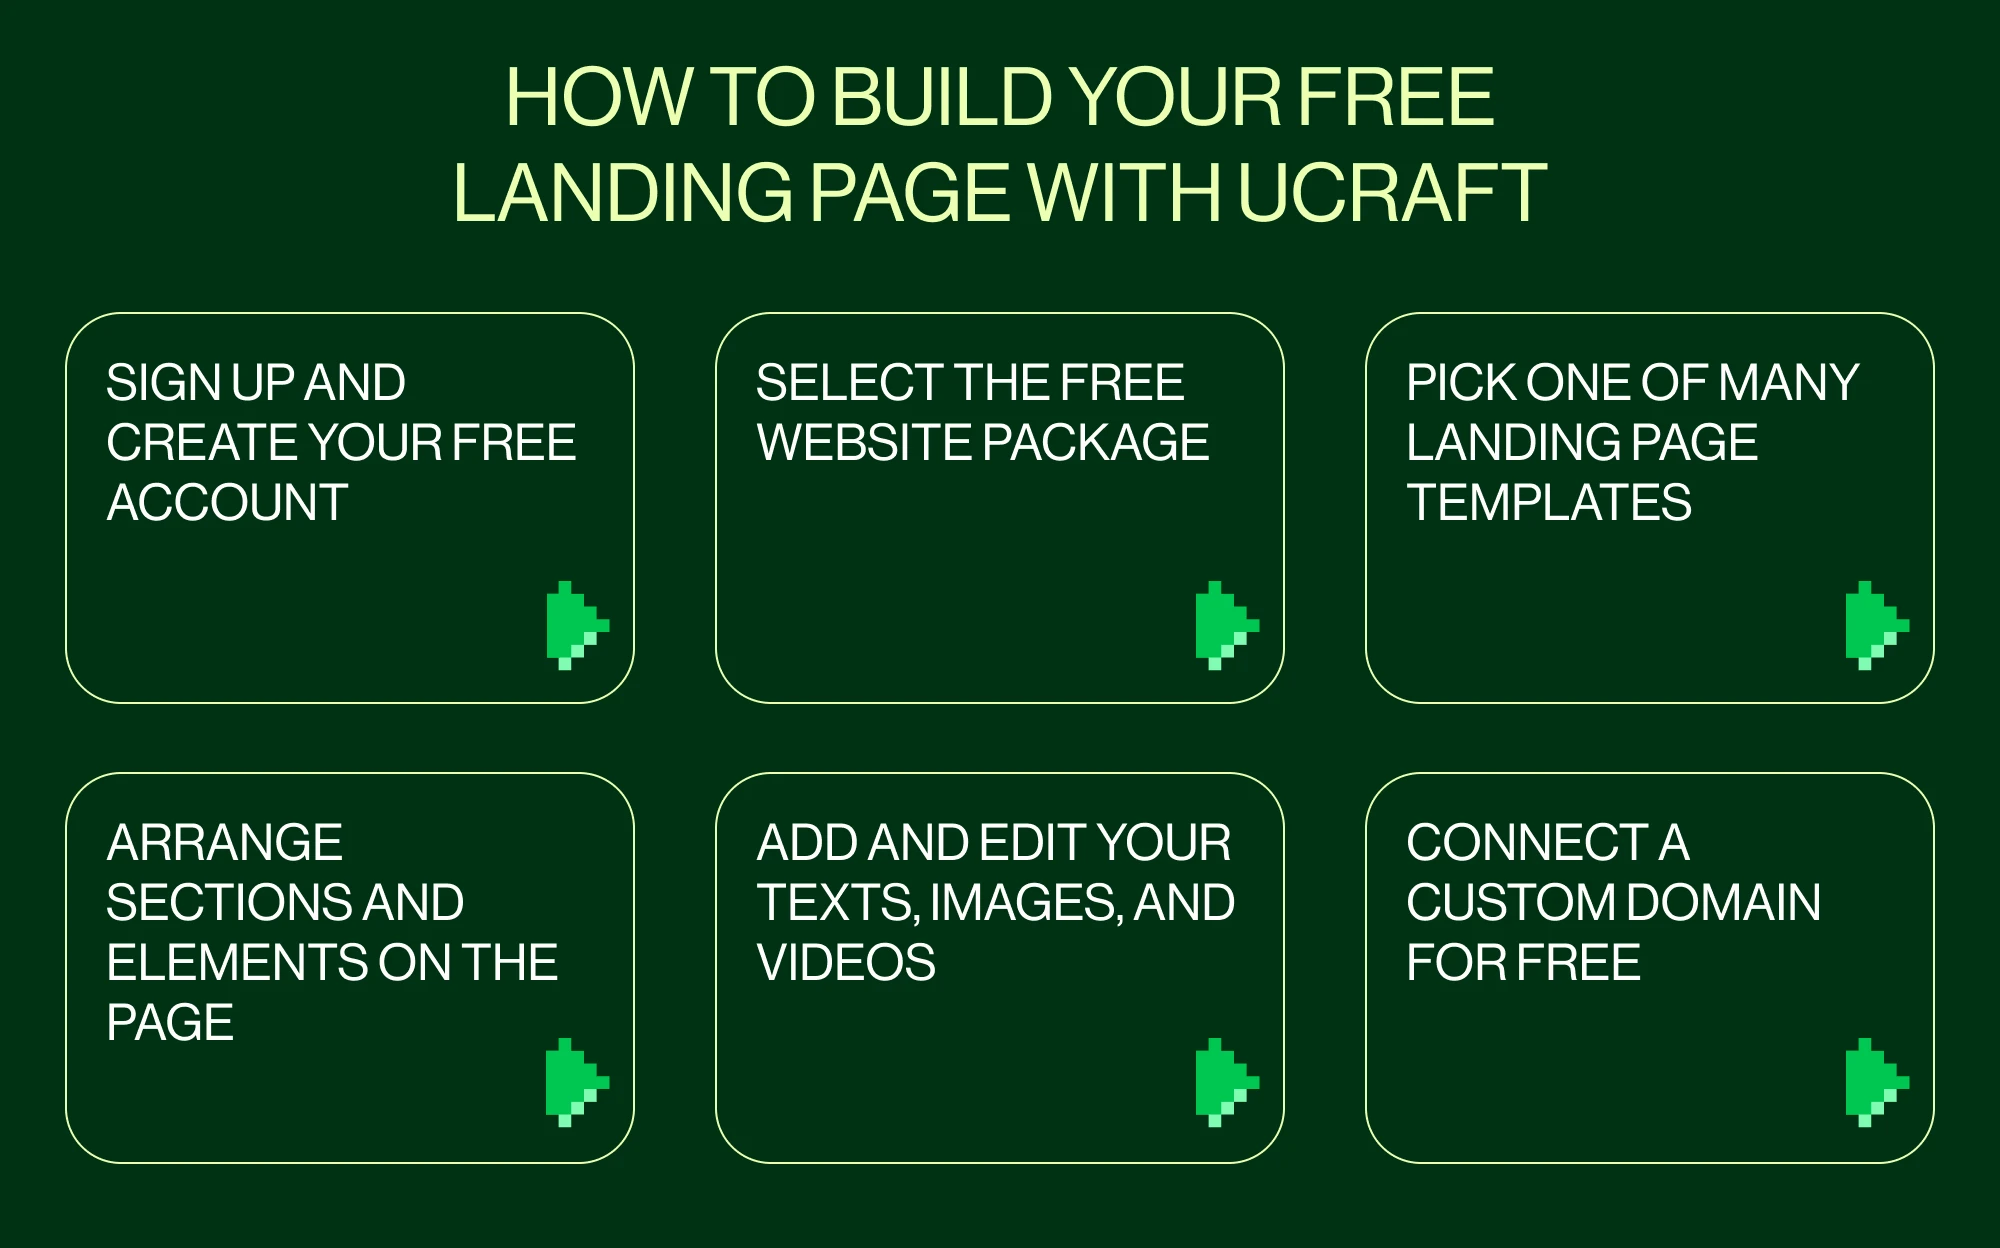 Ucraft-steps to create a free landing page